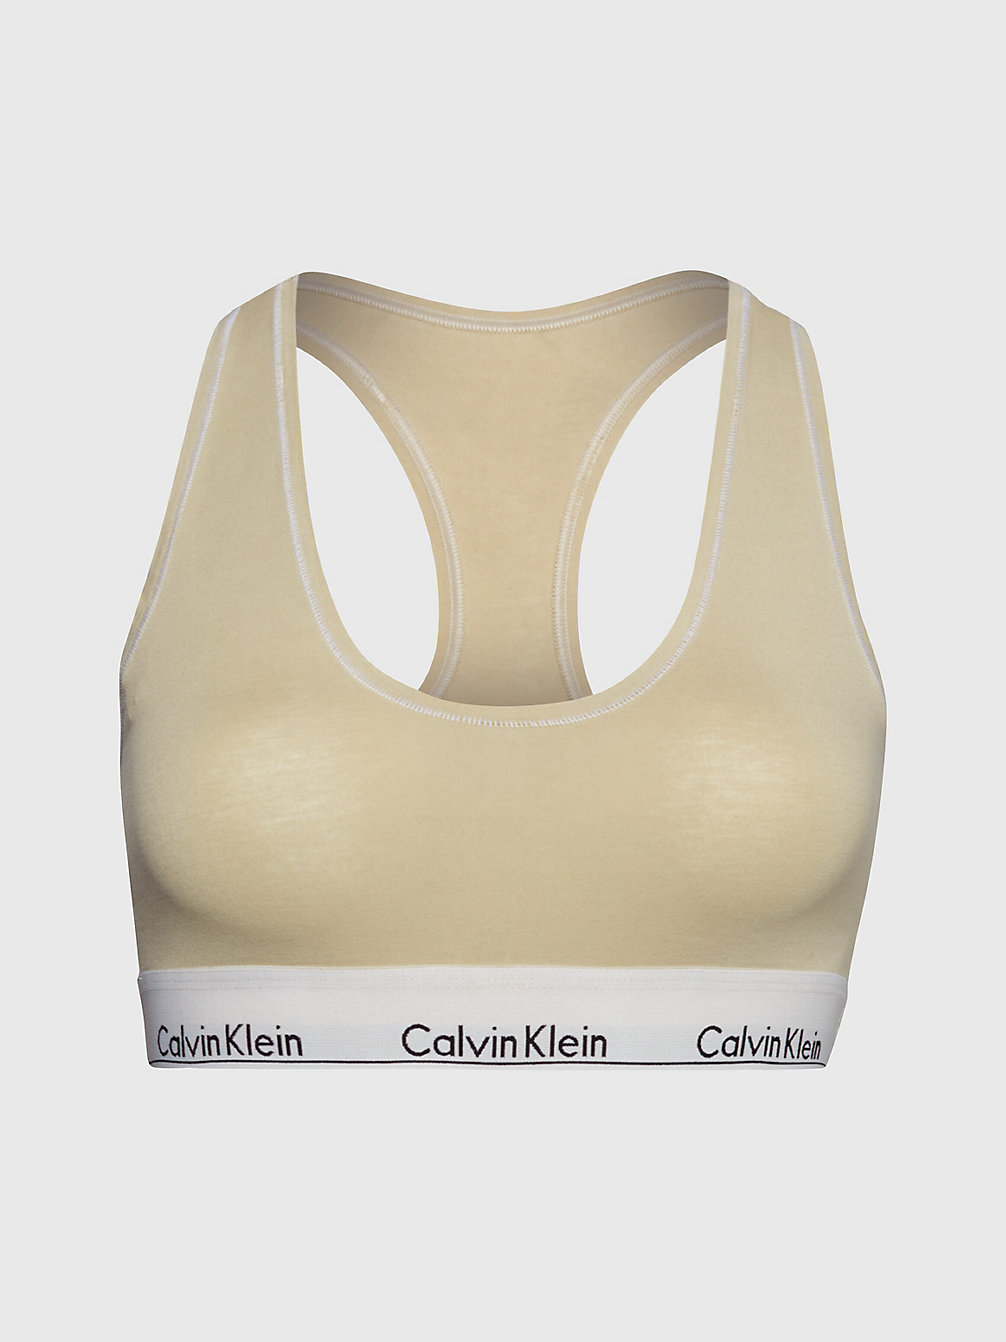 Corpiño - Modern Cotton > SHELL > undefined mujer > Calvin Klein